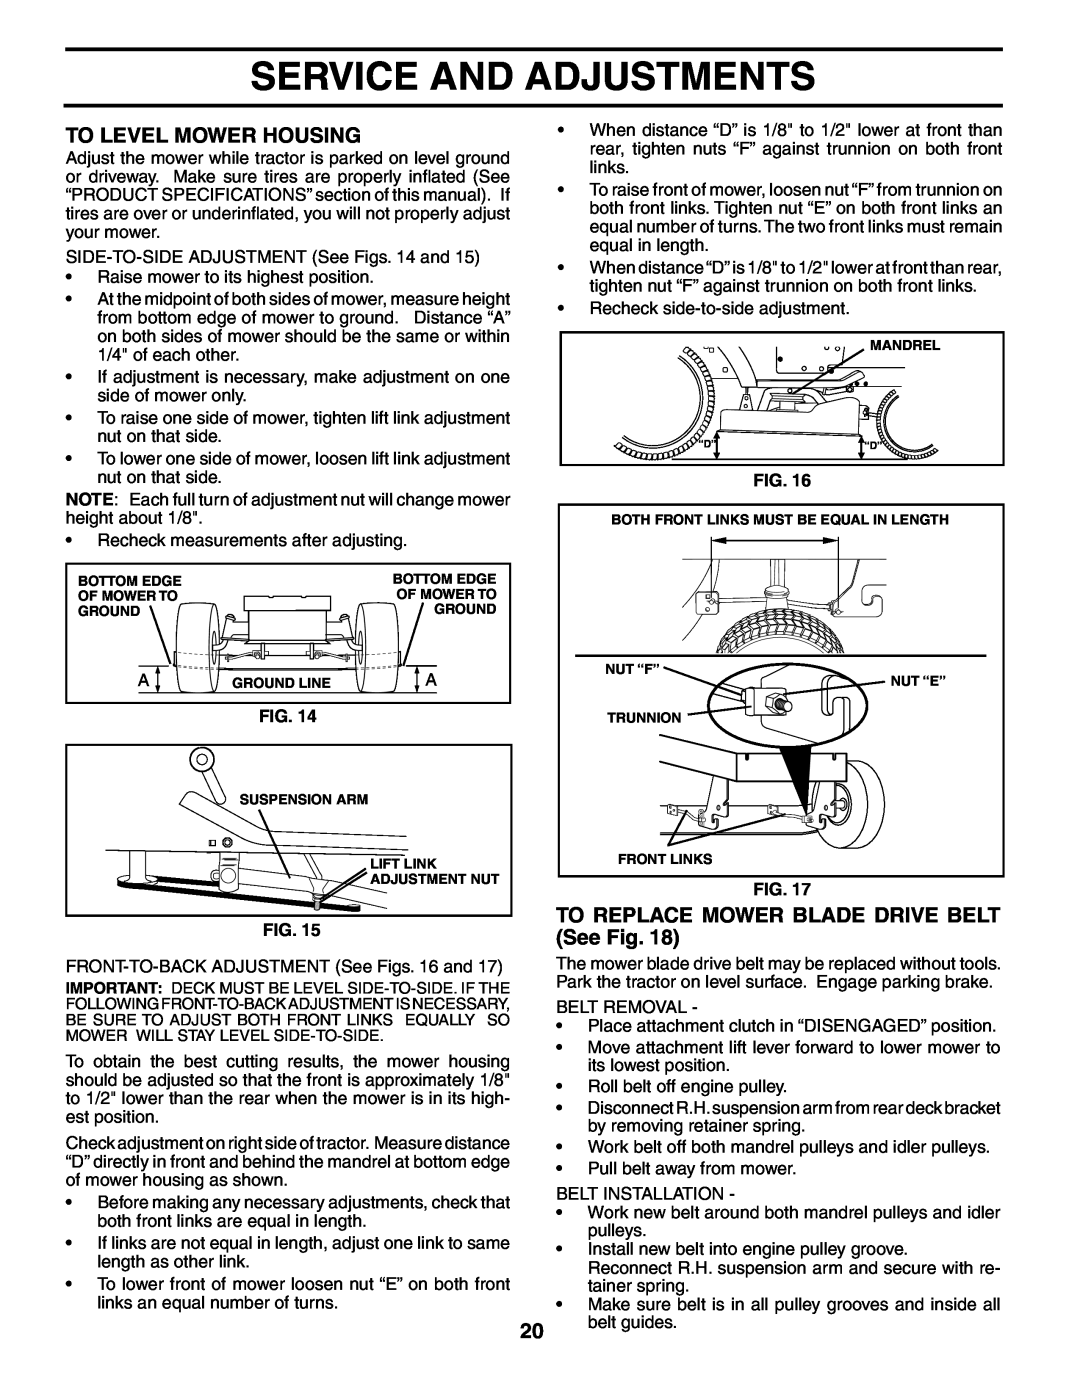 Poulan WE13538LT manual To Level Mower Housing, TO REPLACE MOWER BLADE DRIVE BELT See Fig, Service And Adjustments 